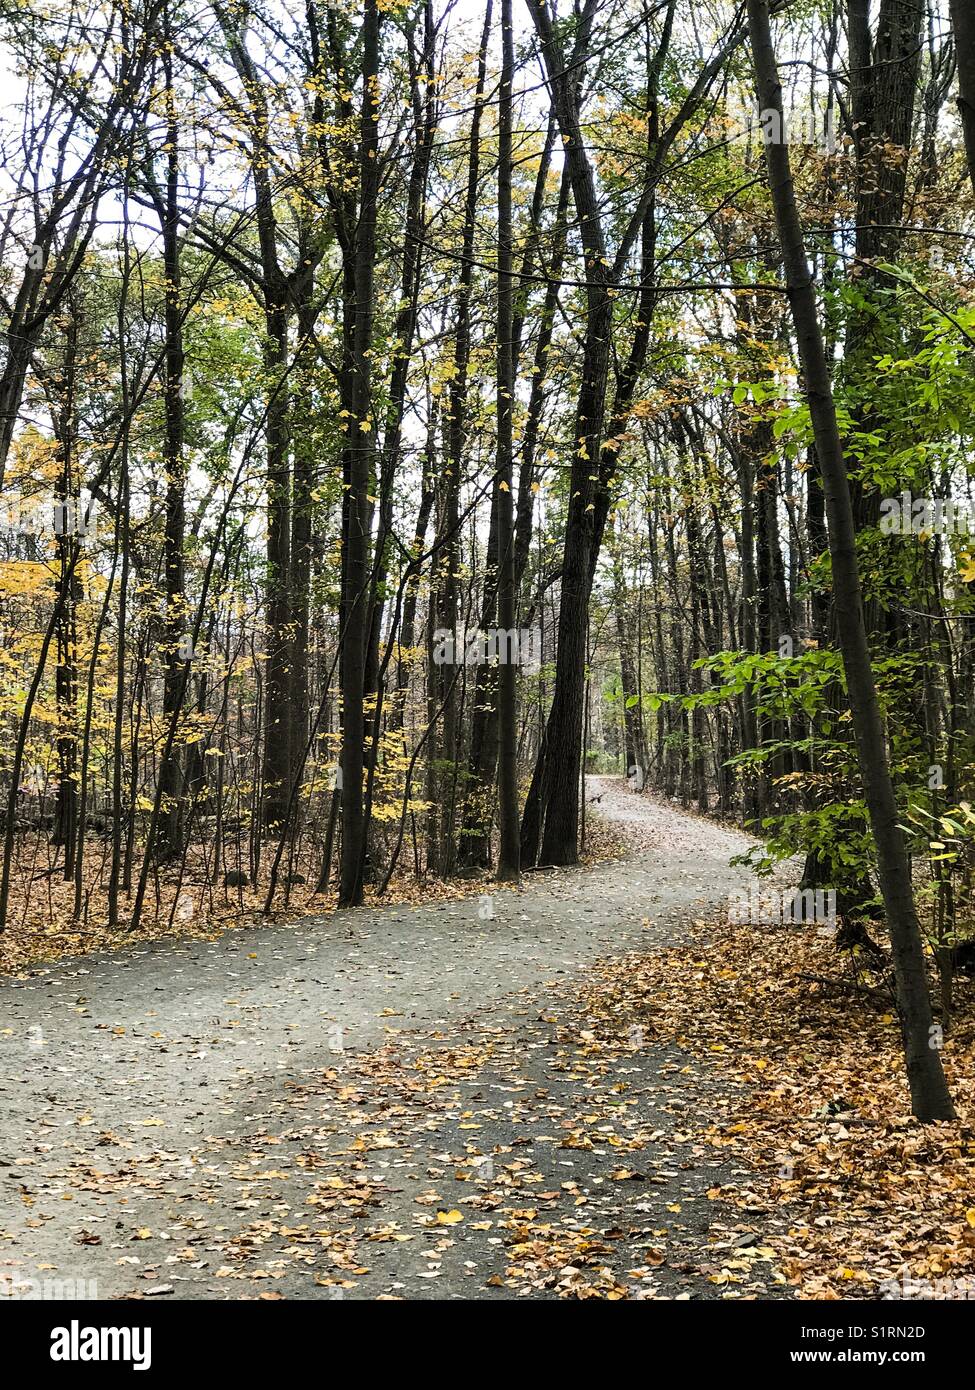 A walking and cycle path winding through woods during fall in Tallman State Park, New Jersey, USA. Stock Photo